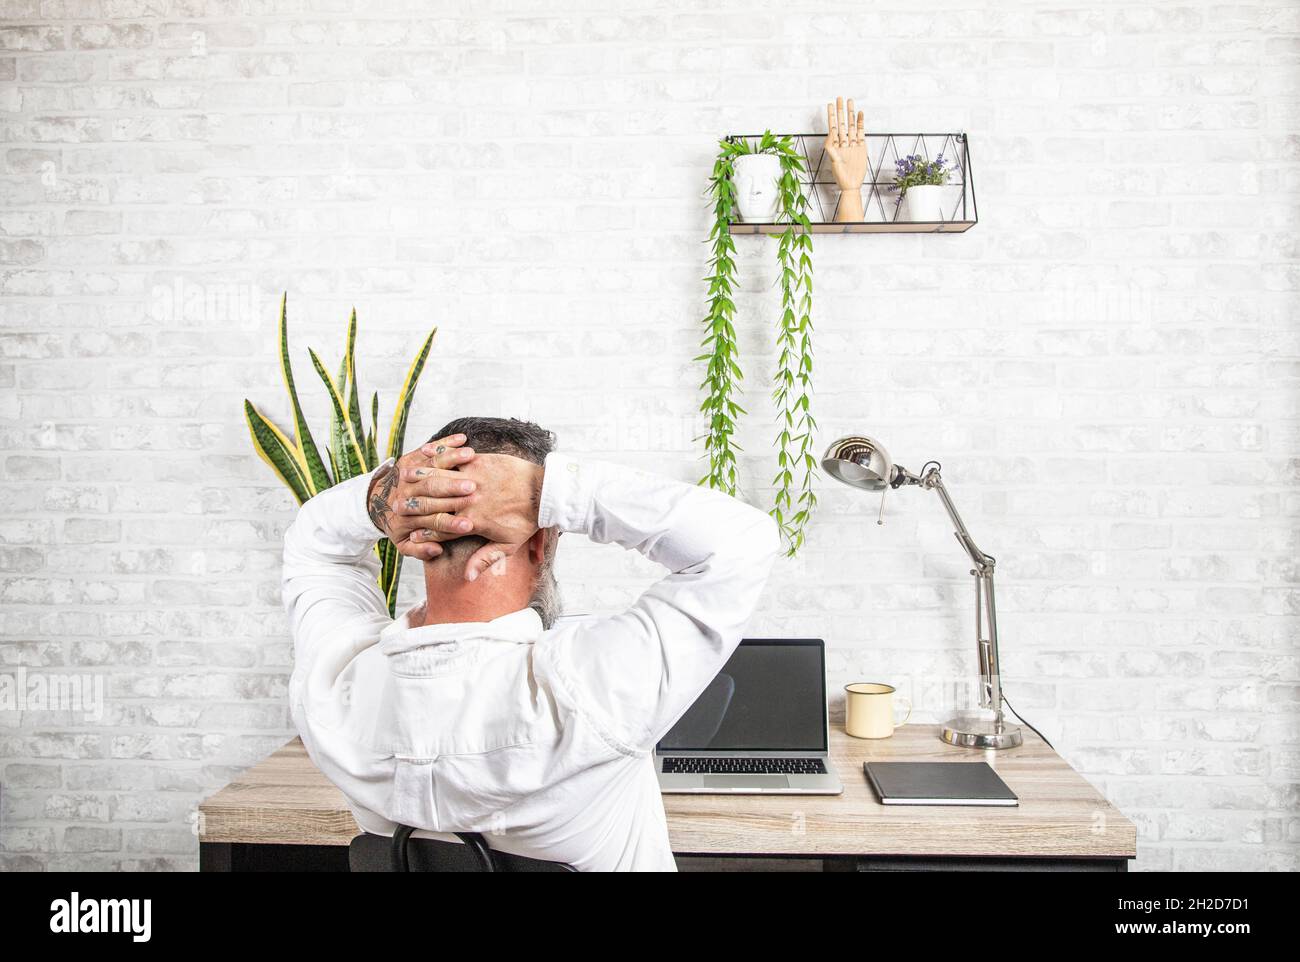 Relax in the Home Office. Rear view of freelancer resting at workplace, leaning on chair with hands behind head, working remotely. Stock Photo